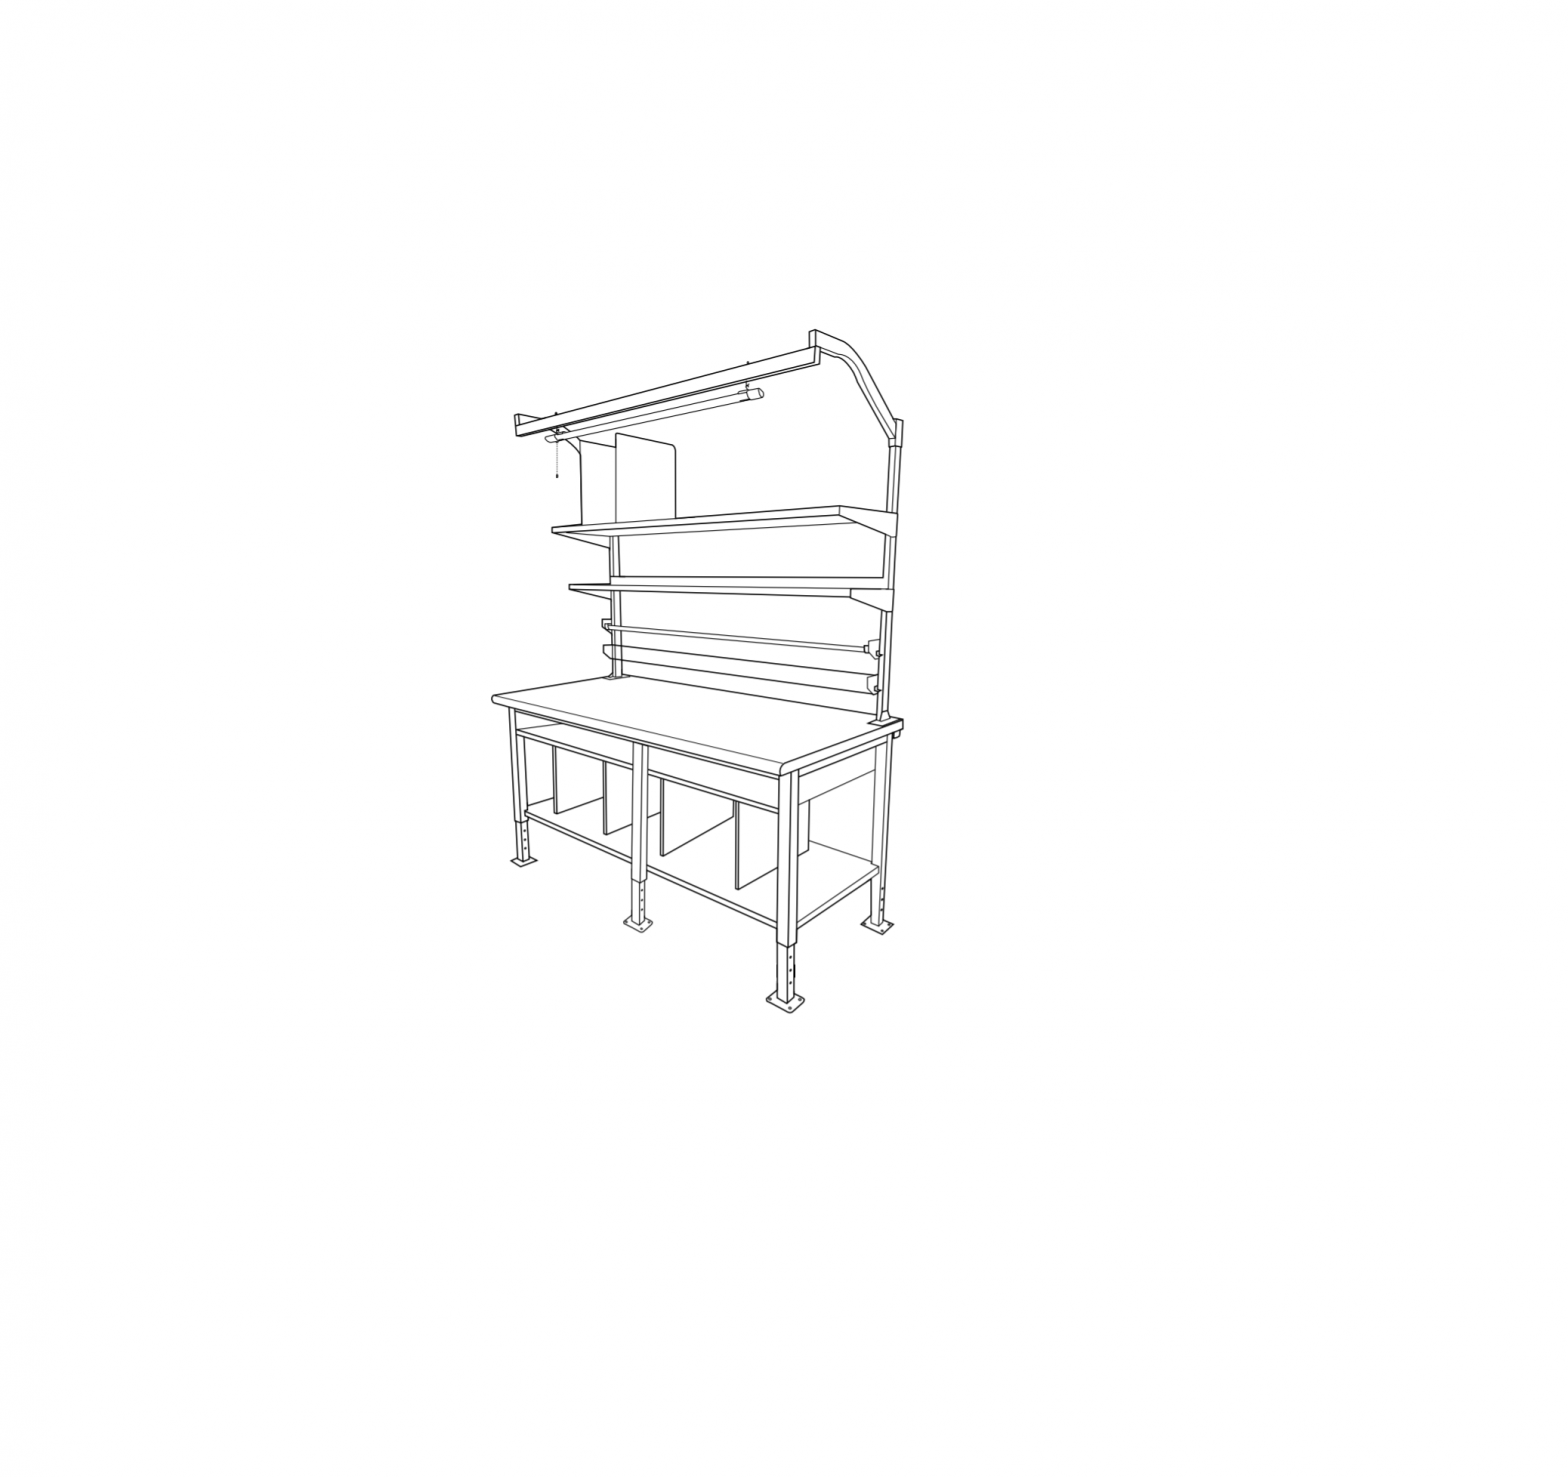 ULINE H-8226 96″ Packing Station Installation Guide